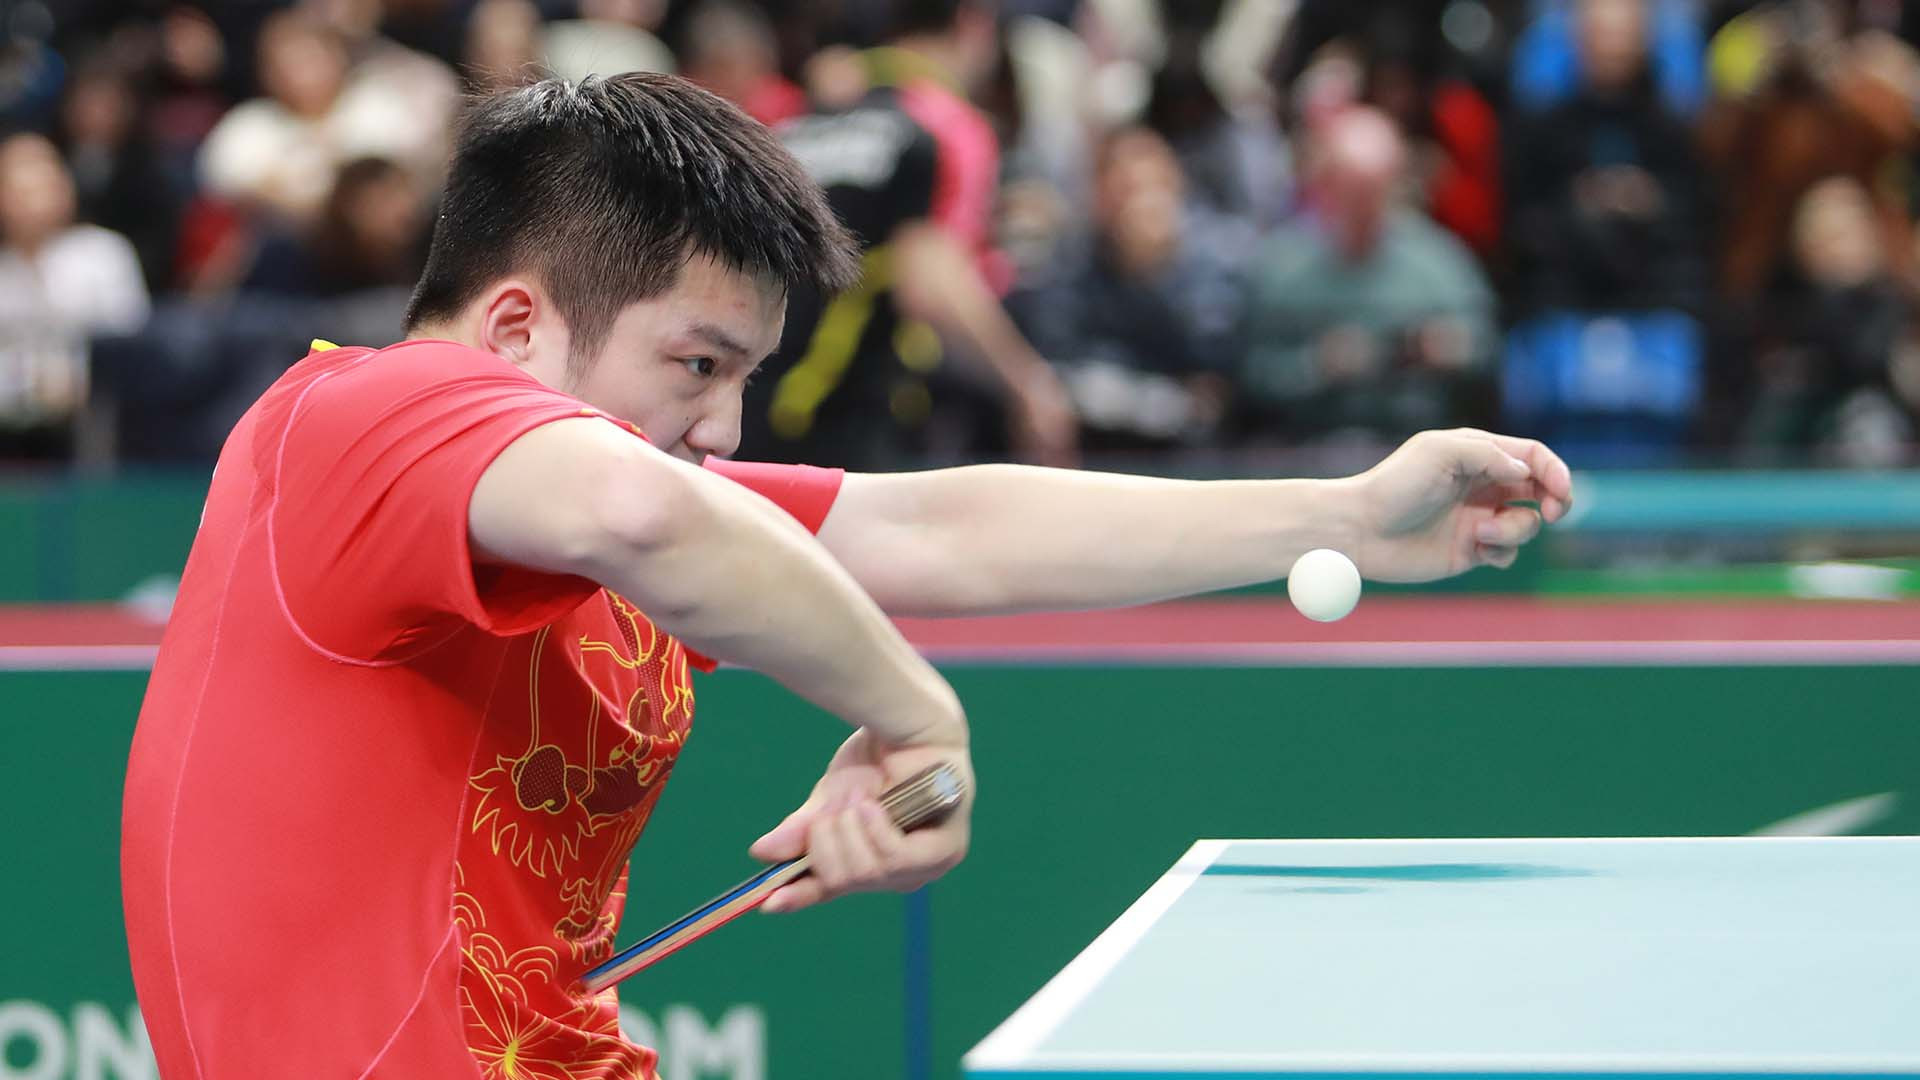 Hosts swept aside as China’s men reach seventh consecutive ITTF Team World Cup final in London